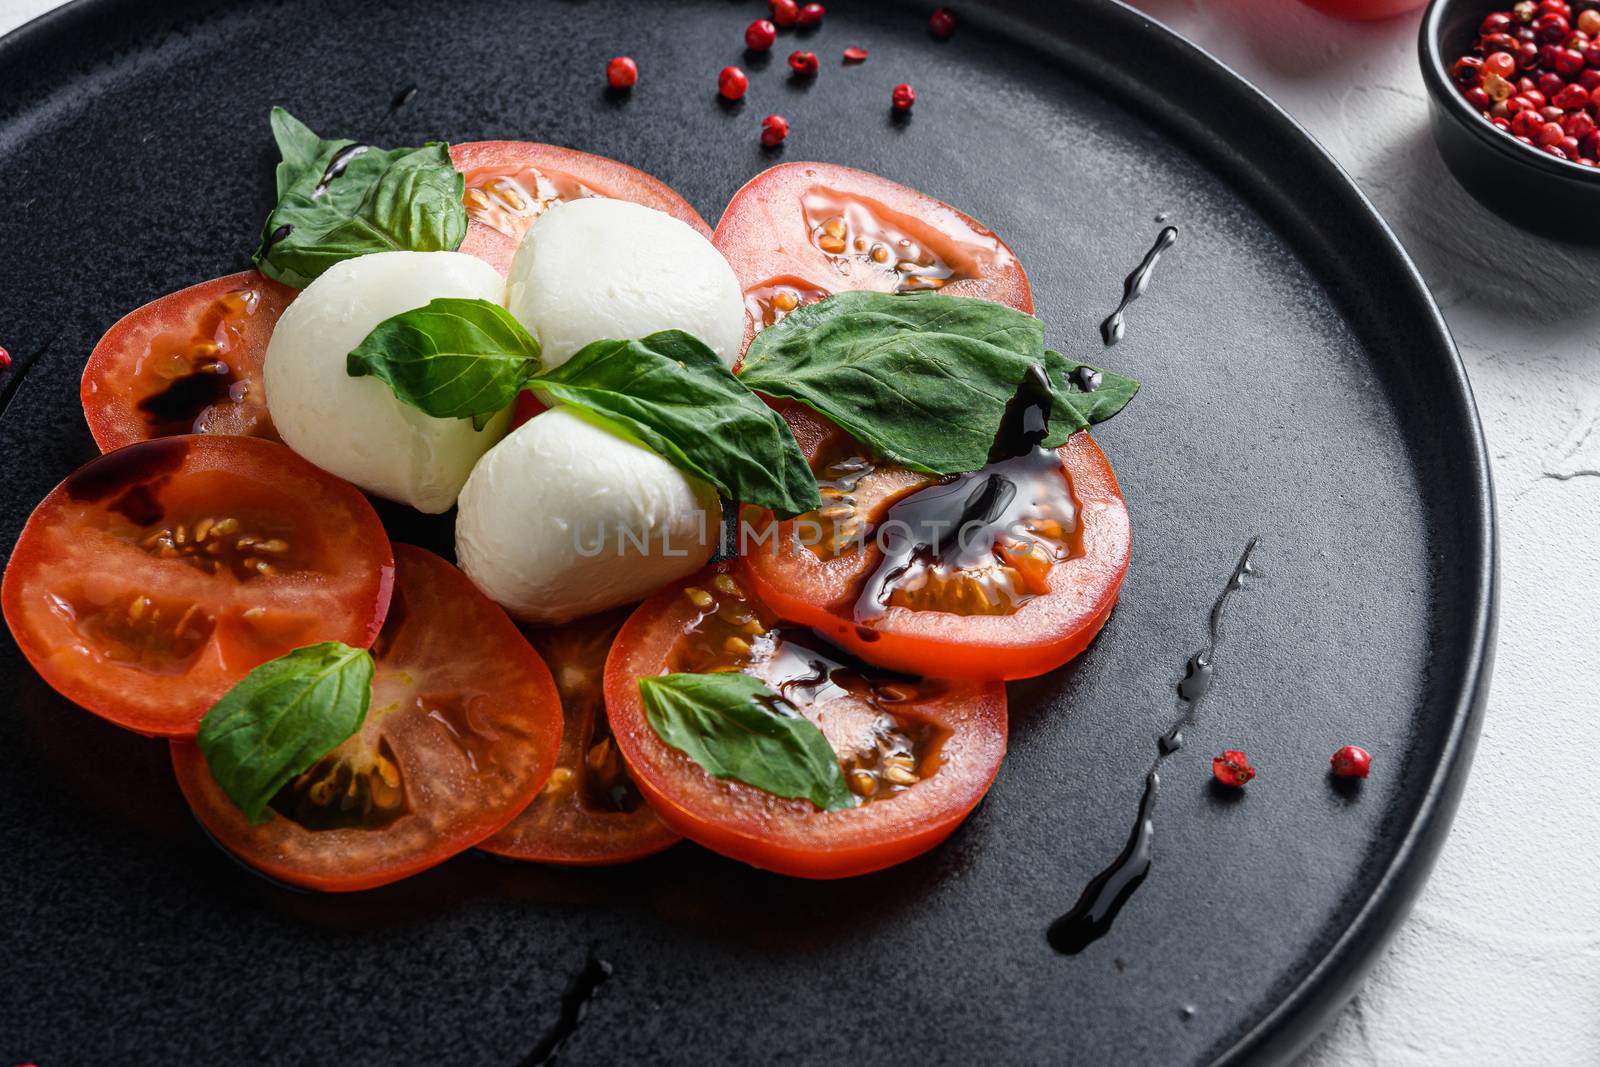 Caprese fresh italian salad with tomatoes, mozzarella, green basil on dark slate plate over white background close up selective focus by Ilianesolenyi